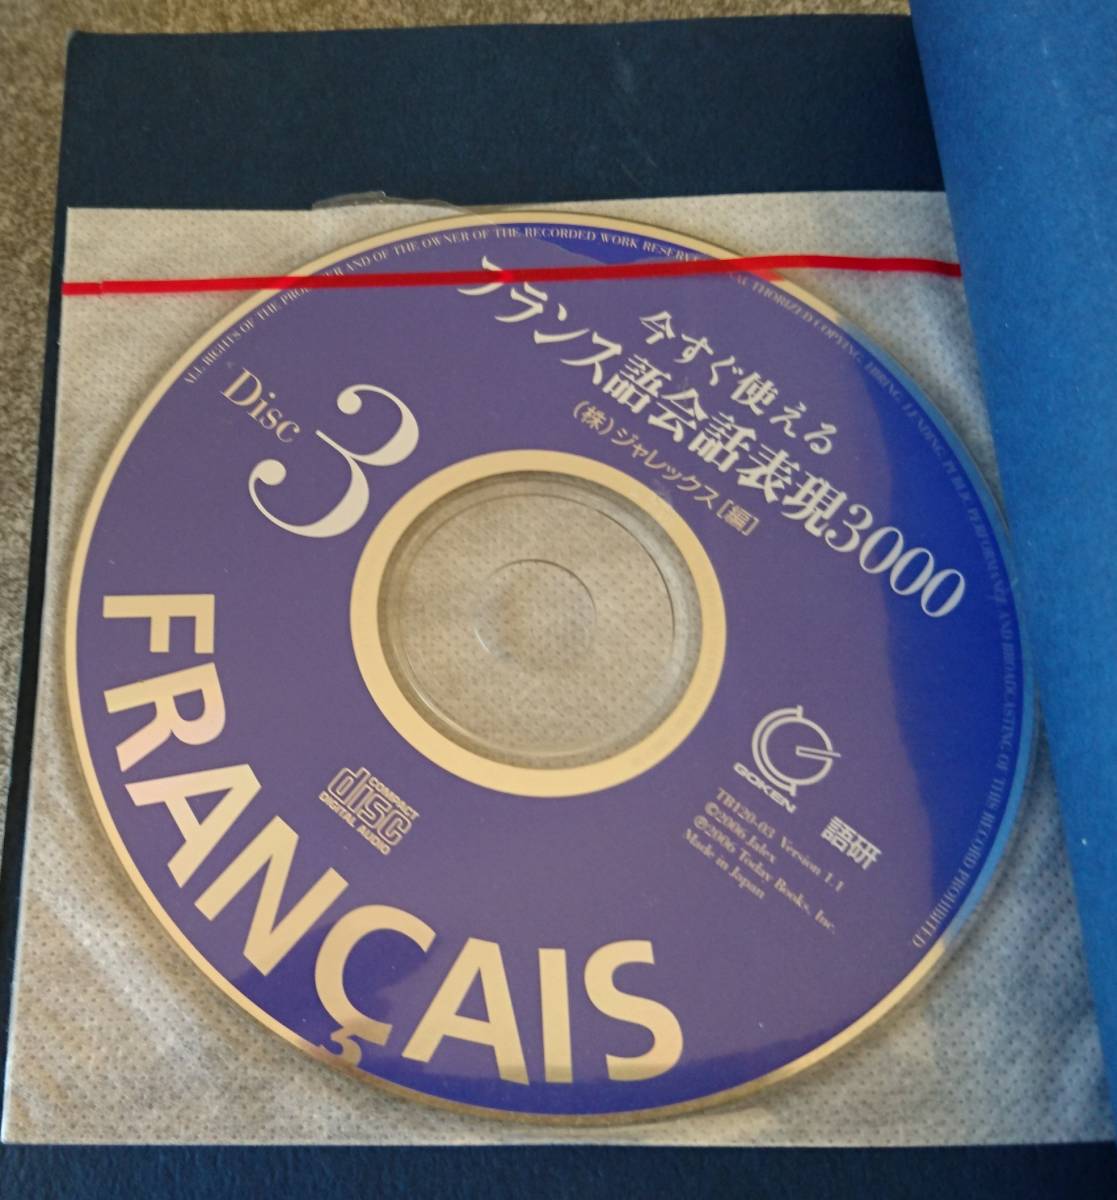  now immediately possible to use French conversation table reality 3000ja Rex CD2 sheets attached (1 piece stockout ) free shipping 